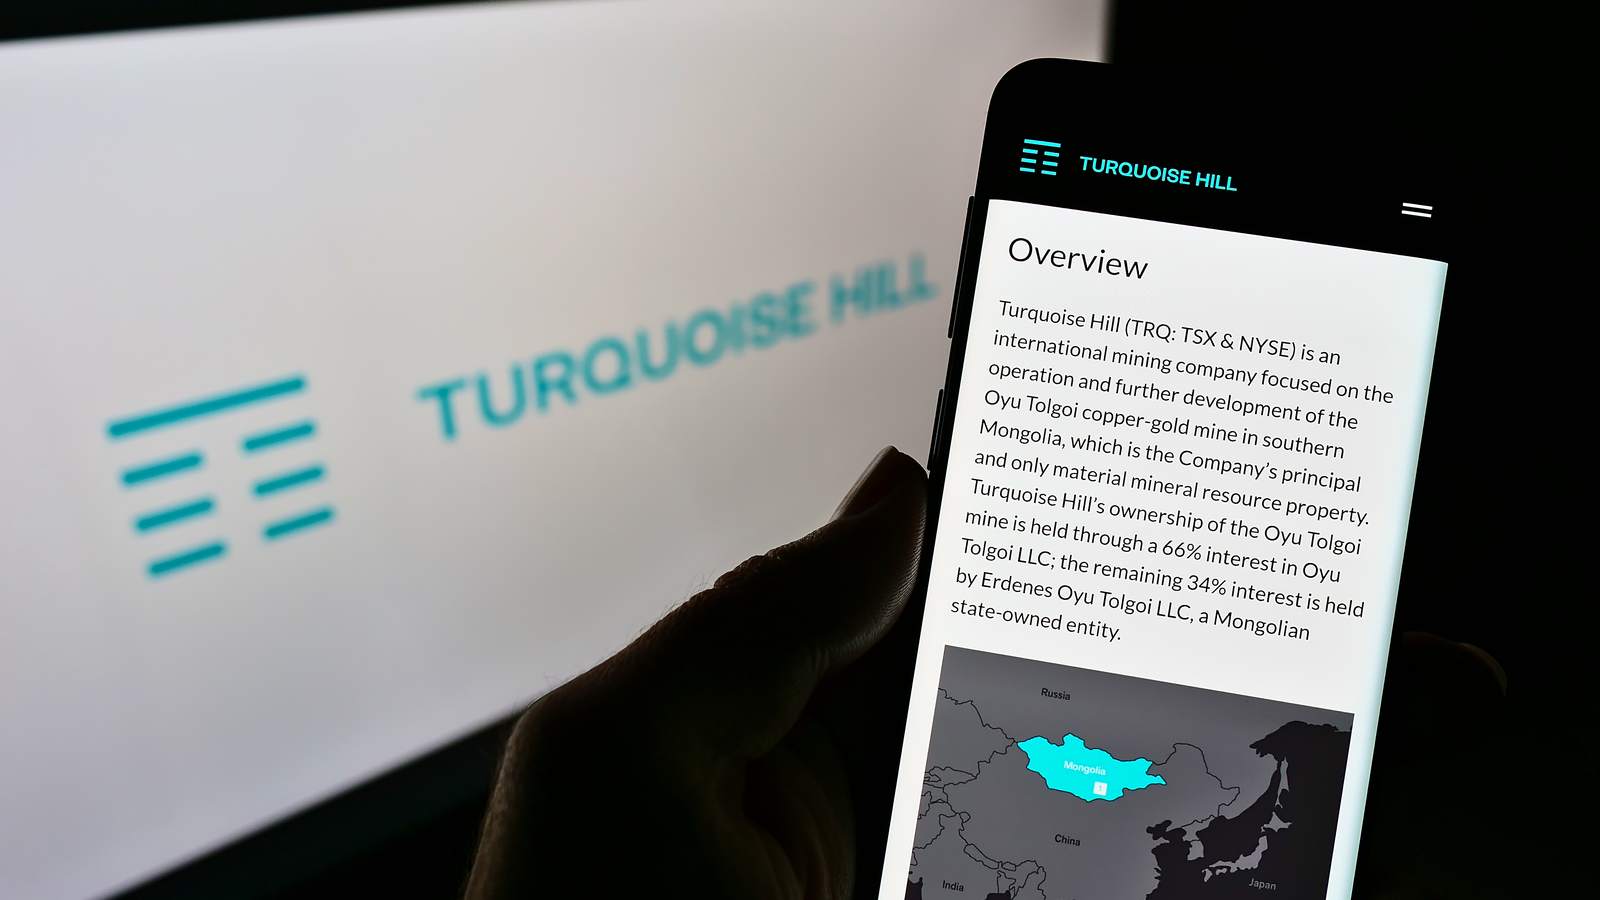 Person holding cellphone with website of Canadian mining company Turquoise Hill Resources Ltd on screen in front of logo. Focus on phone display. TRQ stock.